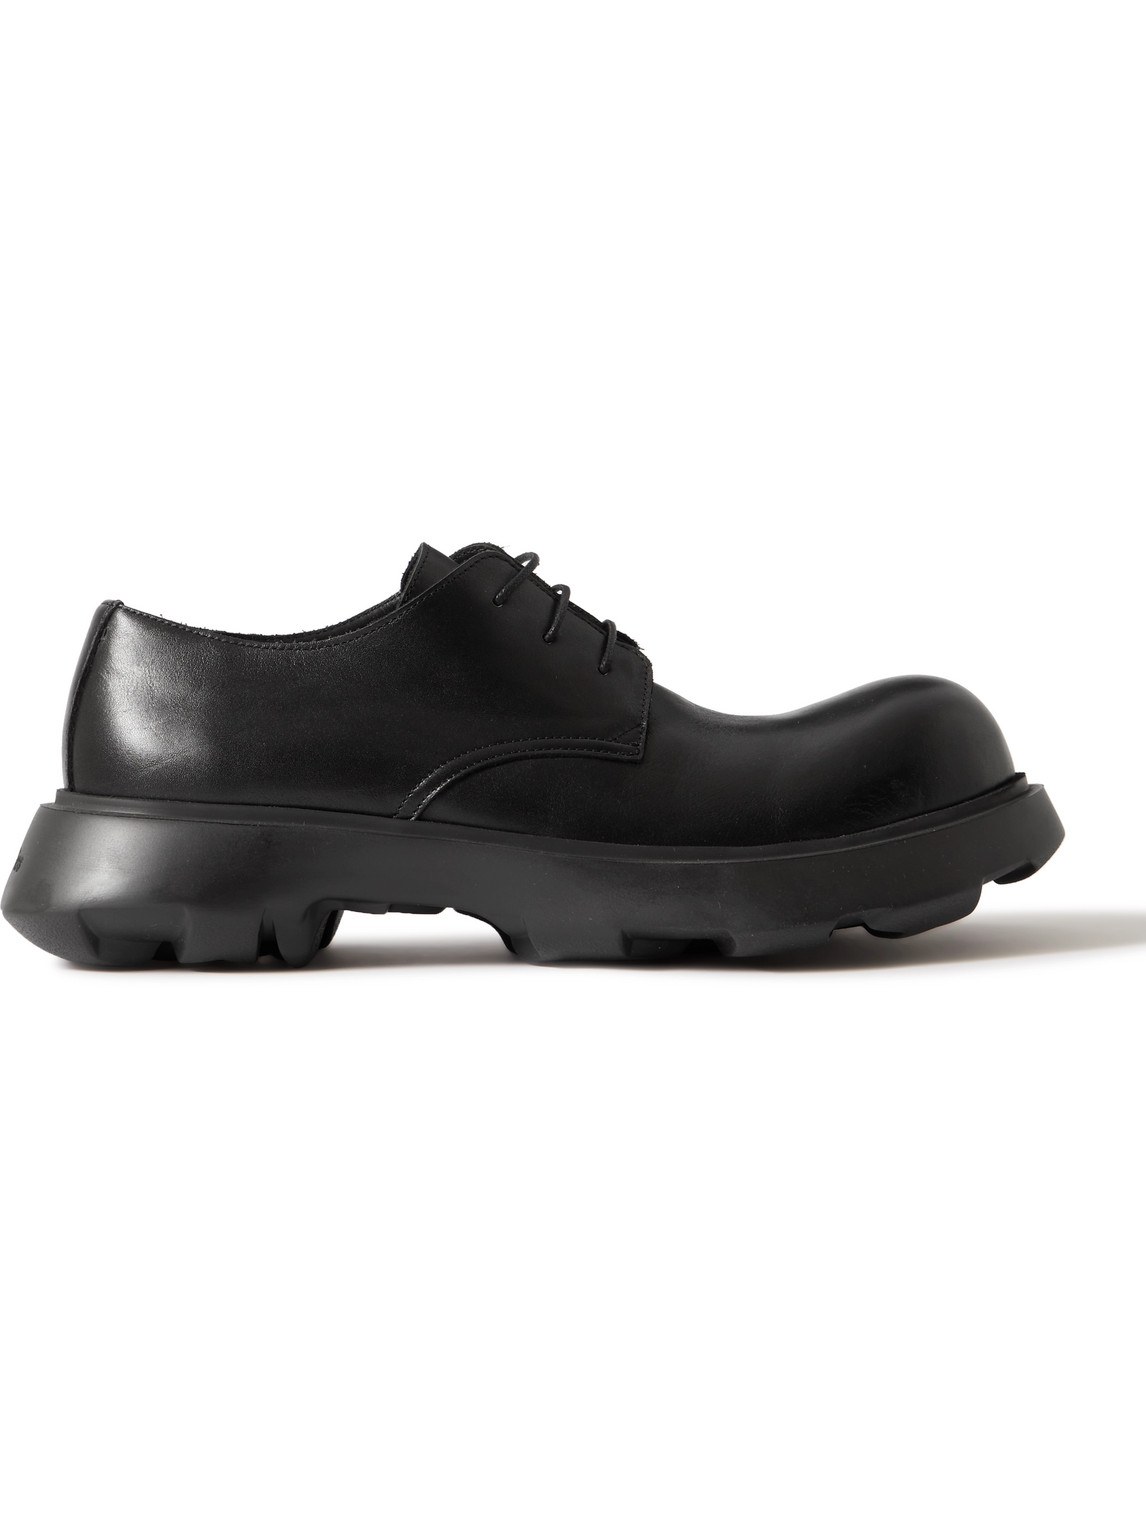 ACNE STUDIOS LEATHER DERBY SHOES